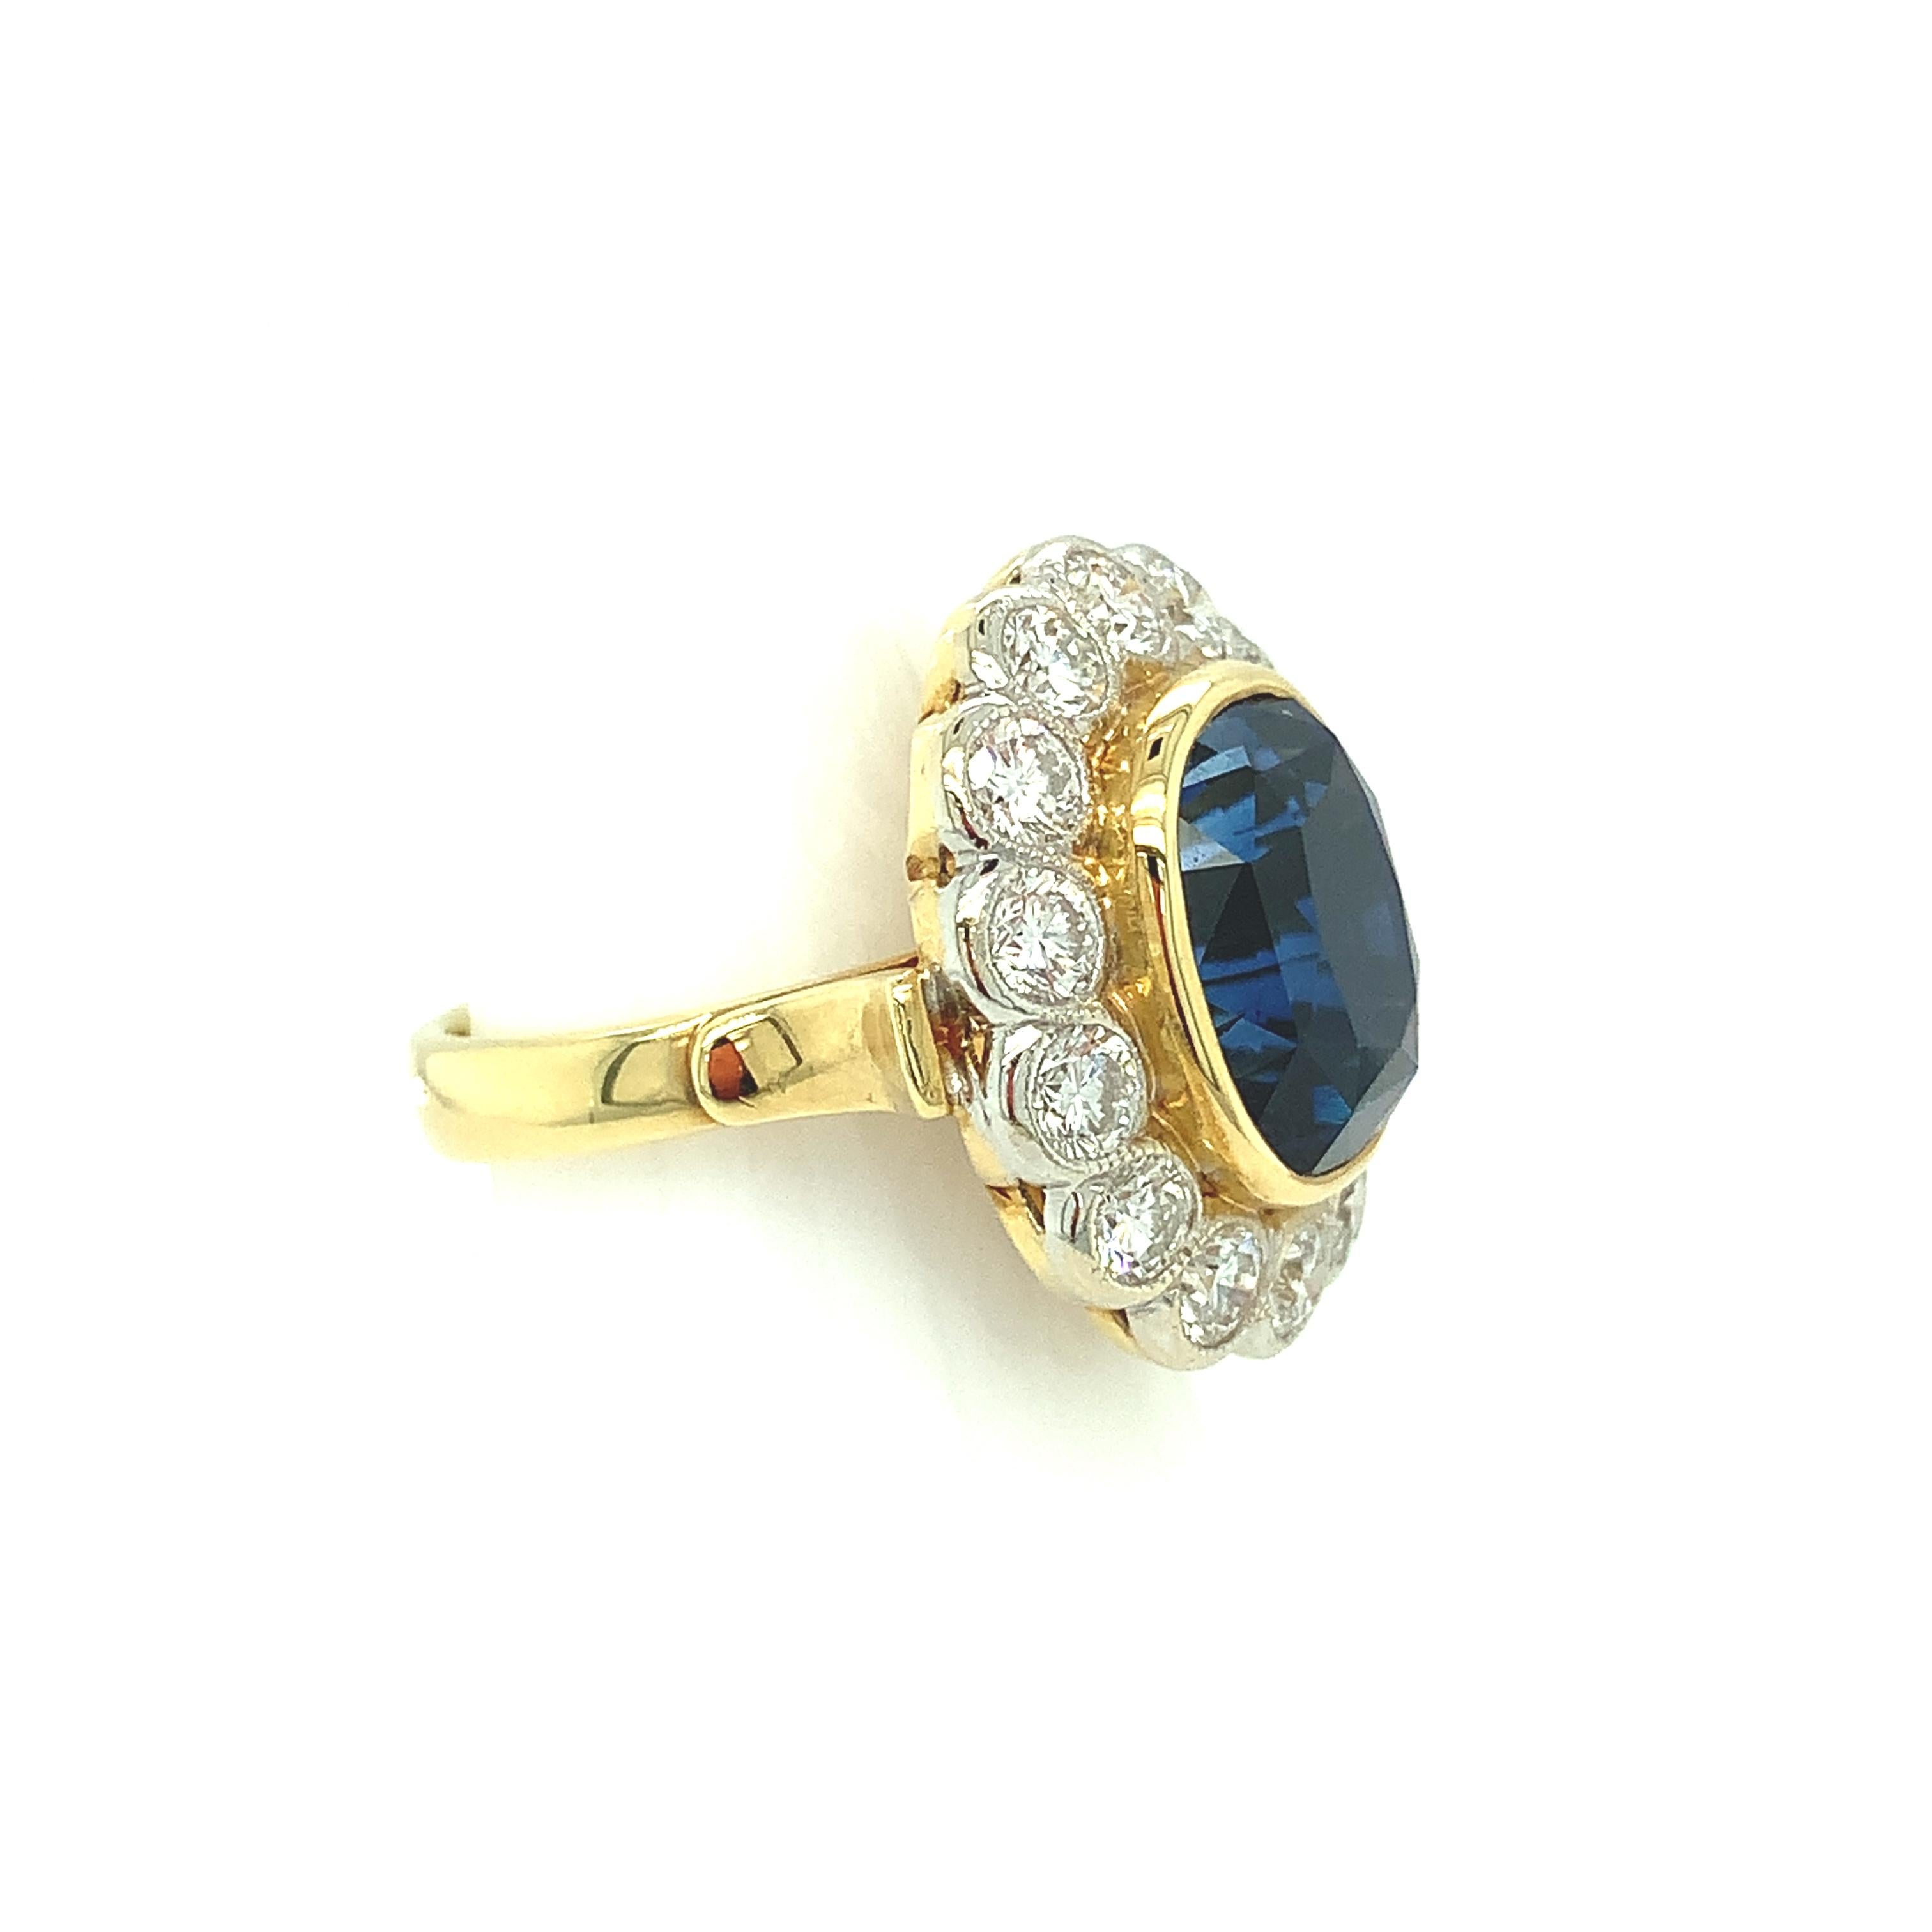 GIA Certified 10.16 Carat Ceylon Blue Sapphire and Diamond Cocktail Ring For Sale 1